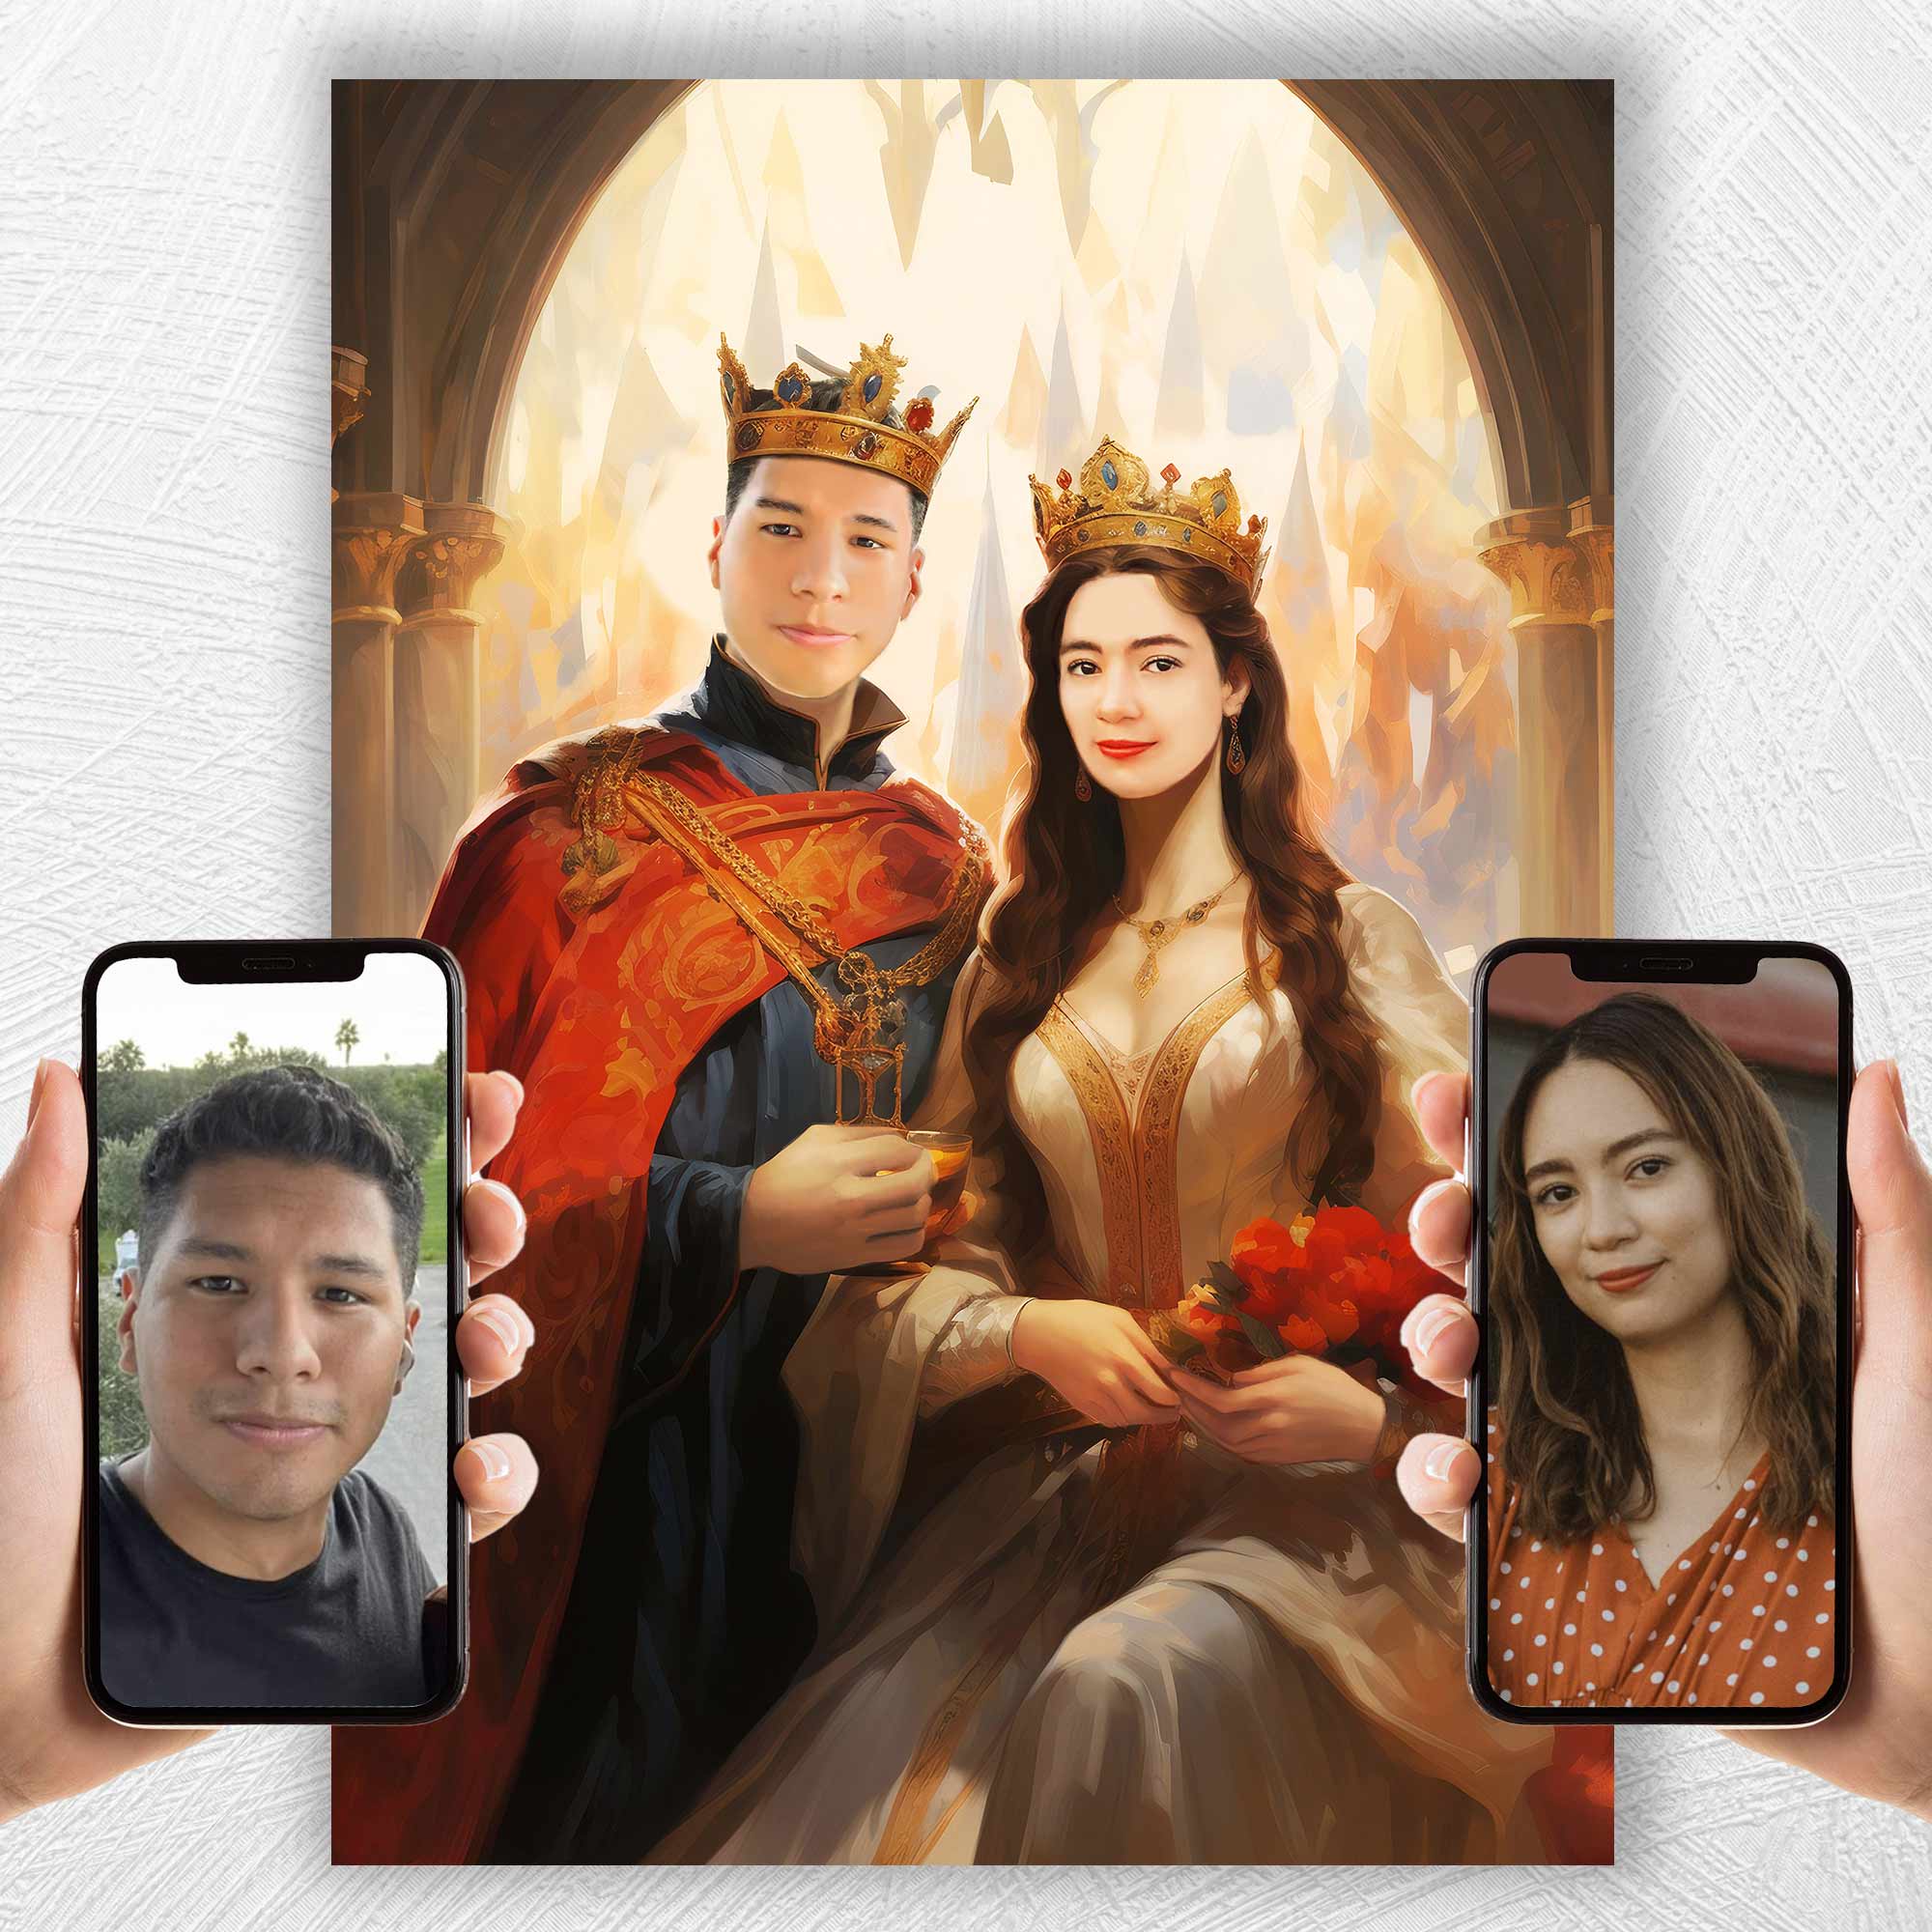 king and queen portraits transformation image 